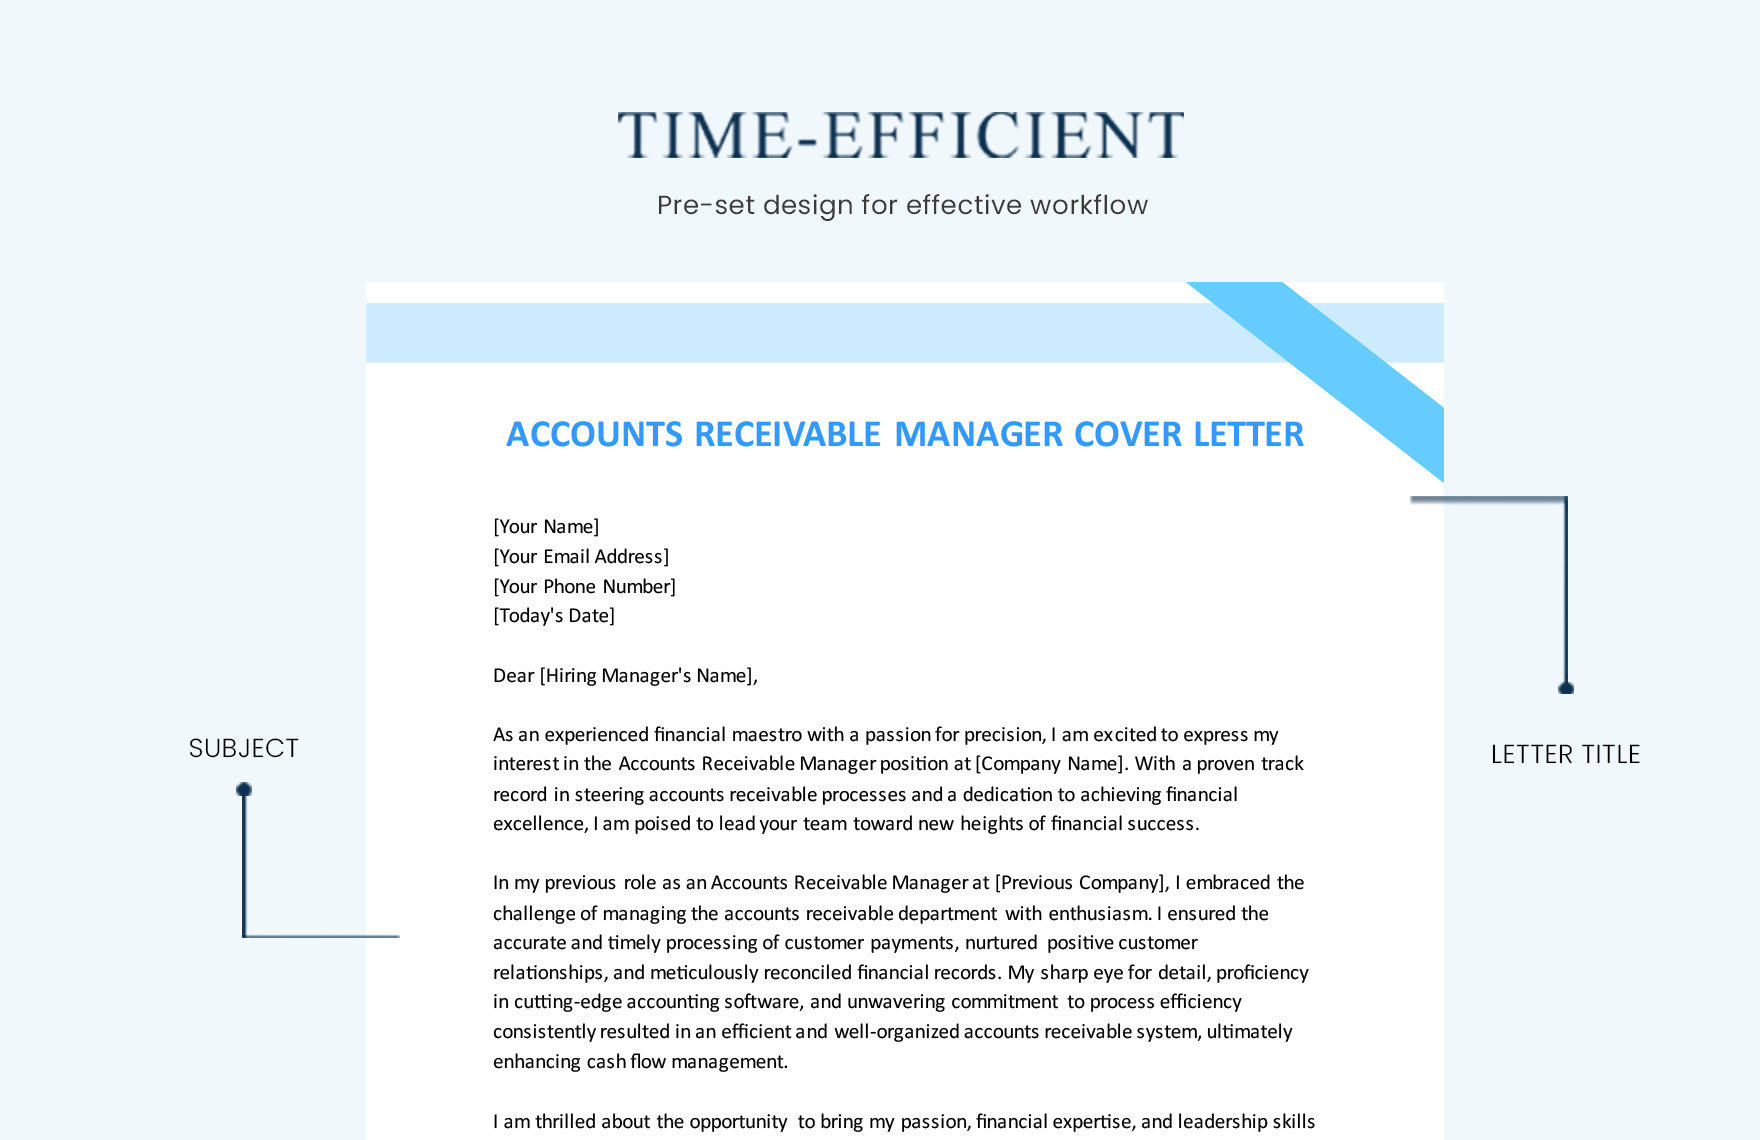 Accounts Receivable Manager Cover Letter